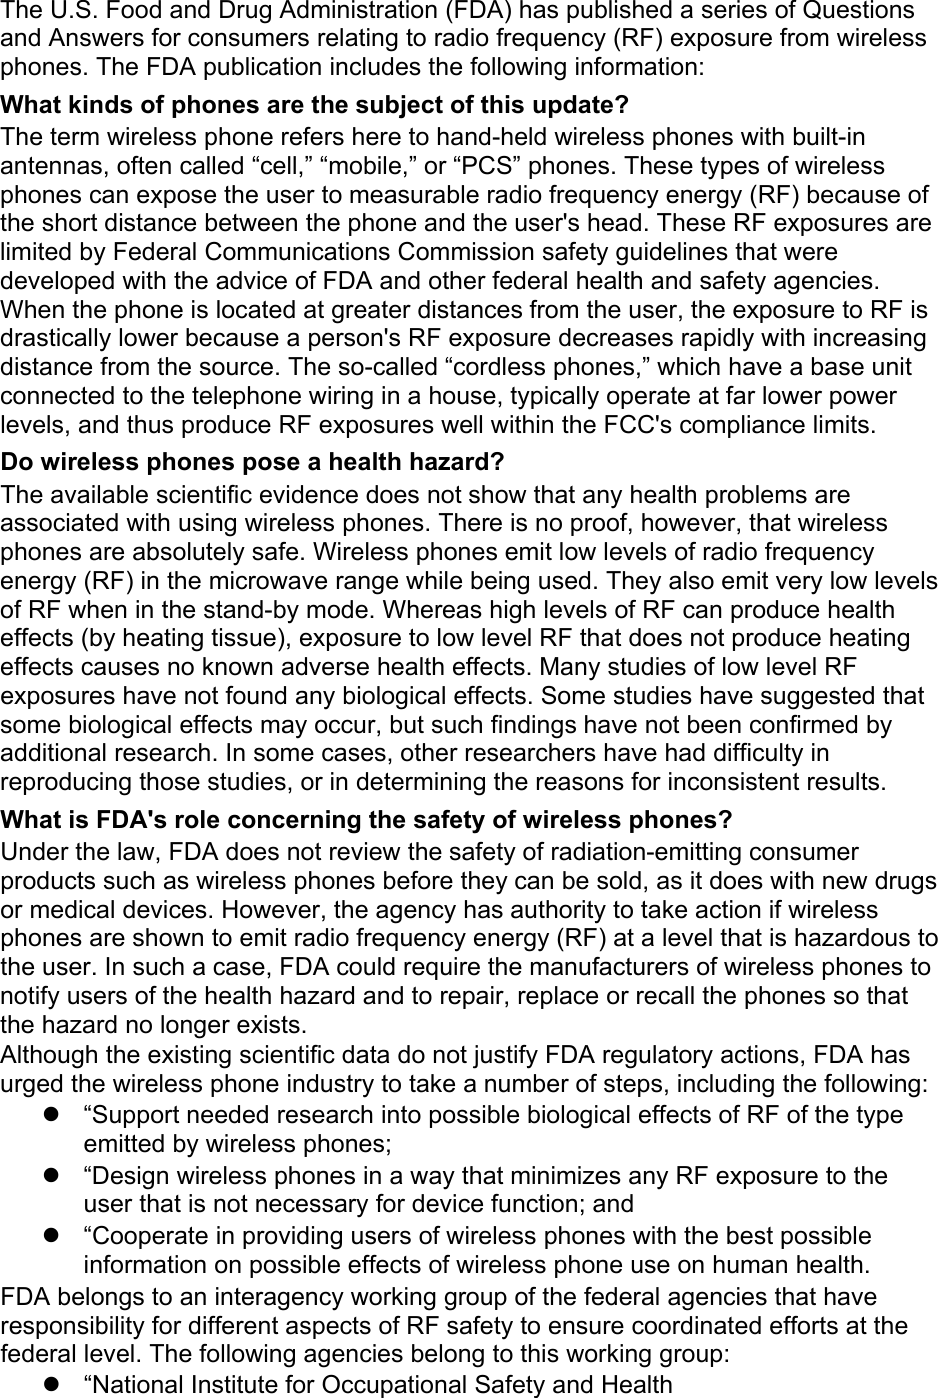 The U.S. Food and Drug Administration (FDA) has published a series of Questions and Answers for consumers relating to radio frequency (RF) exposure from wireless phones. The FDA publication includes the following information:What kinds of phones are the subject of this update? The term wireless phone refers here to hand-held wireless phones with built-in antennas, often called “cell,” “mobile,” or “PCS” phones. These types of wireless phones can expose the user to measurable radio frequency energy (RF) because of the short distance between the phone and the user&apos;s head. These RF exposures are limited by Federal Communications Commission safety guidelines that were developed with the advice of FDA and other federal health and safety agencies. When the phone is located at greater distances from the user, the exposure to RF is drastically lower because a person&apos;s RF exposure decreases rapidly with increasing distance from the source. The so-called “cordless phones,” which have a base unit connected to the telephone wiring in a house, typically operate at far lower power levels, and thus produce RF exposures well within the FCC&apos;s compliance limits.Do wireless phones pose a health hazard? The available scientific evidence does not show that any health problems are associated with using wireless phones. There is no proof, however, that wireless phones are absolutely safe. Wireless phones emit low levels of radio frequency energy (RF) in the microwave range while being used. They also emit very low levels of RF when in the stand-by mode. Whereas high levels of RF can produce health effects (by heating tissue), exposure to low level RF that does not produce heating effects causes no known adverse health effects. Many studies of low level RF exposures have not found any biological effects. Some studies have suggested that some biological effects may occur, but such findings have not been confirmed by additional research. In some cases, other researchers have had difficulty in reproducing those studies, or in determining the reasons for inconsistent results.What is FDA&apos;s role concerning the safety of wireless phones? Under the law, FDA does not review the safety of radiation-emitting consumer products such as wireless phones before they can be sold, as it does with new drugs or medical devices. However, the agency has authority to take action if wireless phones are shown to emit radio frequency energy (RF) at a level that is hazardous to the user. In such a case, FDA could require the manufacturers of wireless phones to notify users of the health hazard and to repair, replace or recall the phones so that the hazard no longer exists.Although the existing scientific data do not justify FDA regulatory actions, FDA has urged the wireless phone industry to take a number of steps, including the following:  “Support needed research into possible biological effects of RF of the type emitted by wireless phones;  “Design wireless phones in a way that minimizes any RF exposure to the user that is not necessary for device function; and  “Cooperate in providing users of wireless phones with the best possible information on possible effects of wireless phone use on human health.FDA belongs to an interagency working group of the federal agencies that have responsibility for different aspects of RF safety to ensure coordinated efforts at the federal level. The following agencies belong to this working group:  “National Institute for Occupational Safety and Health